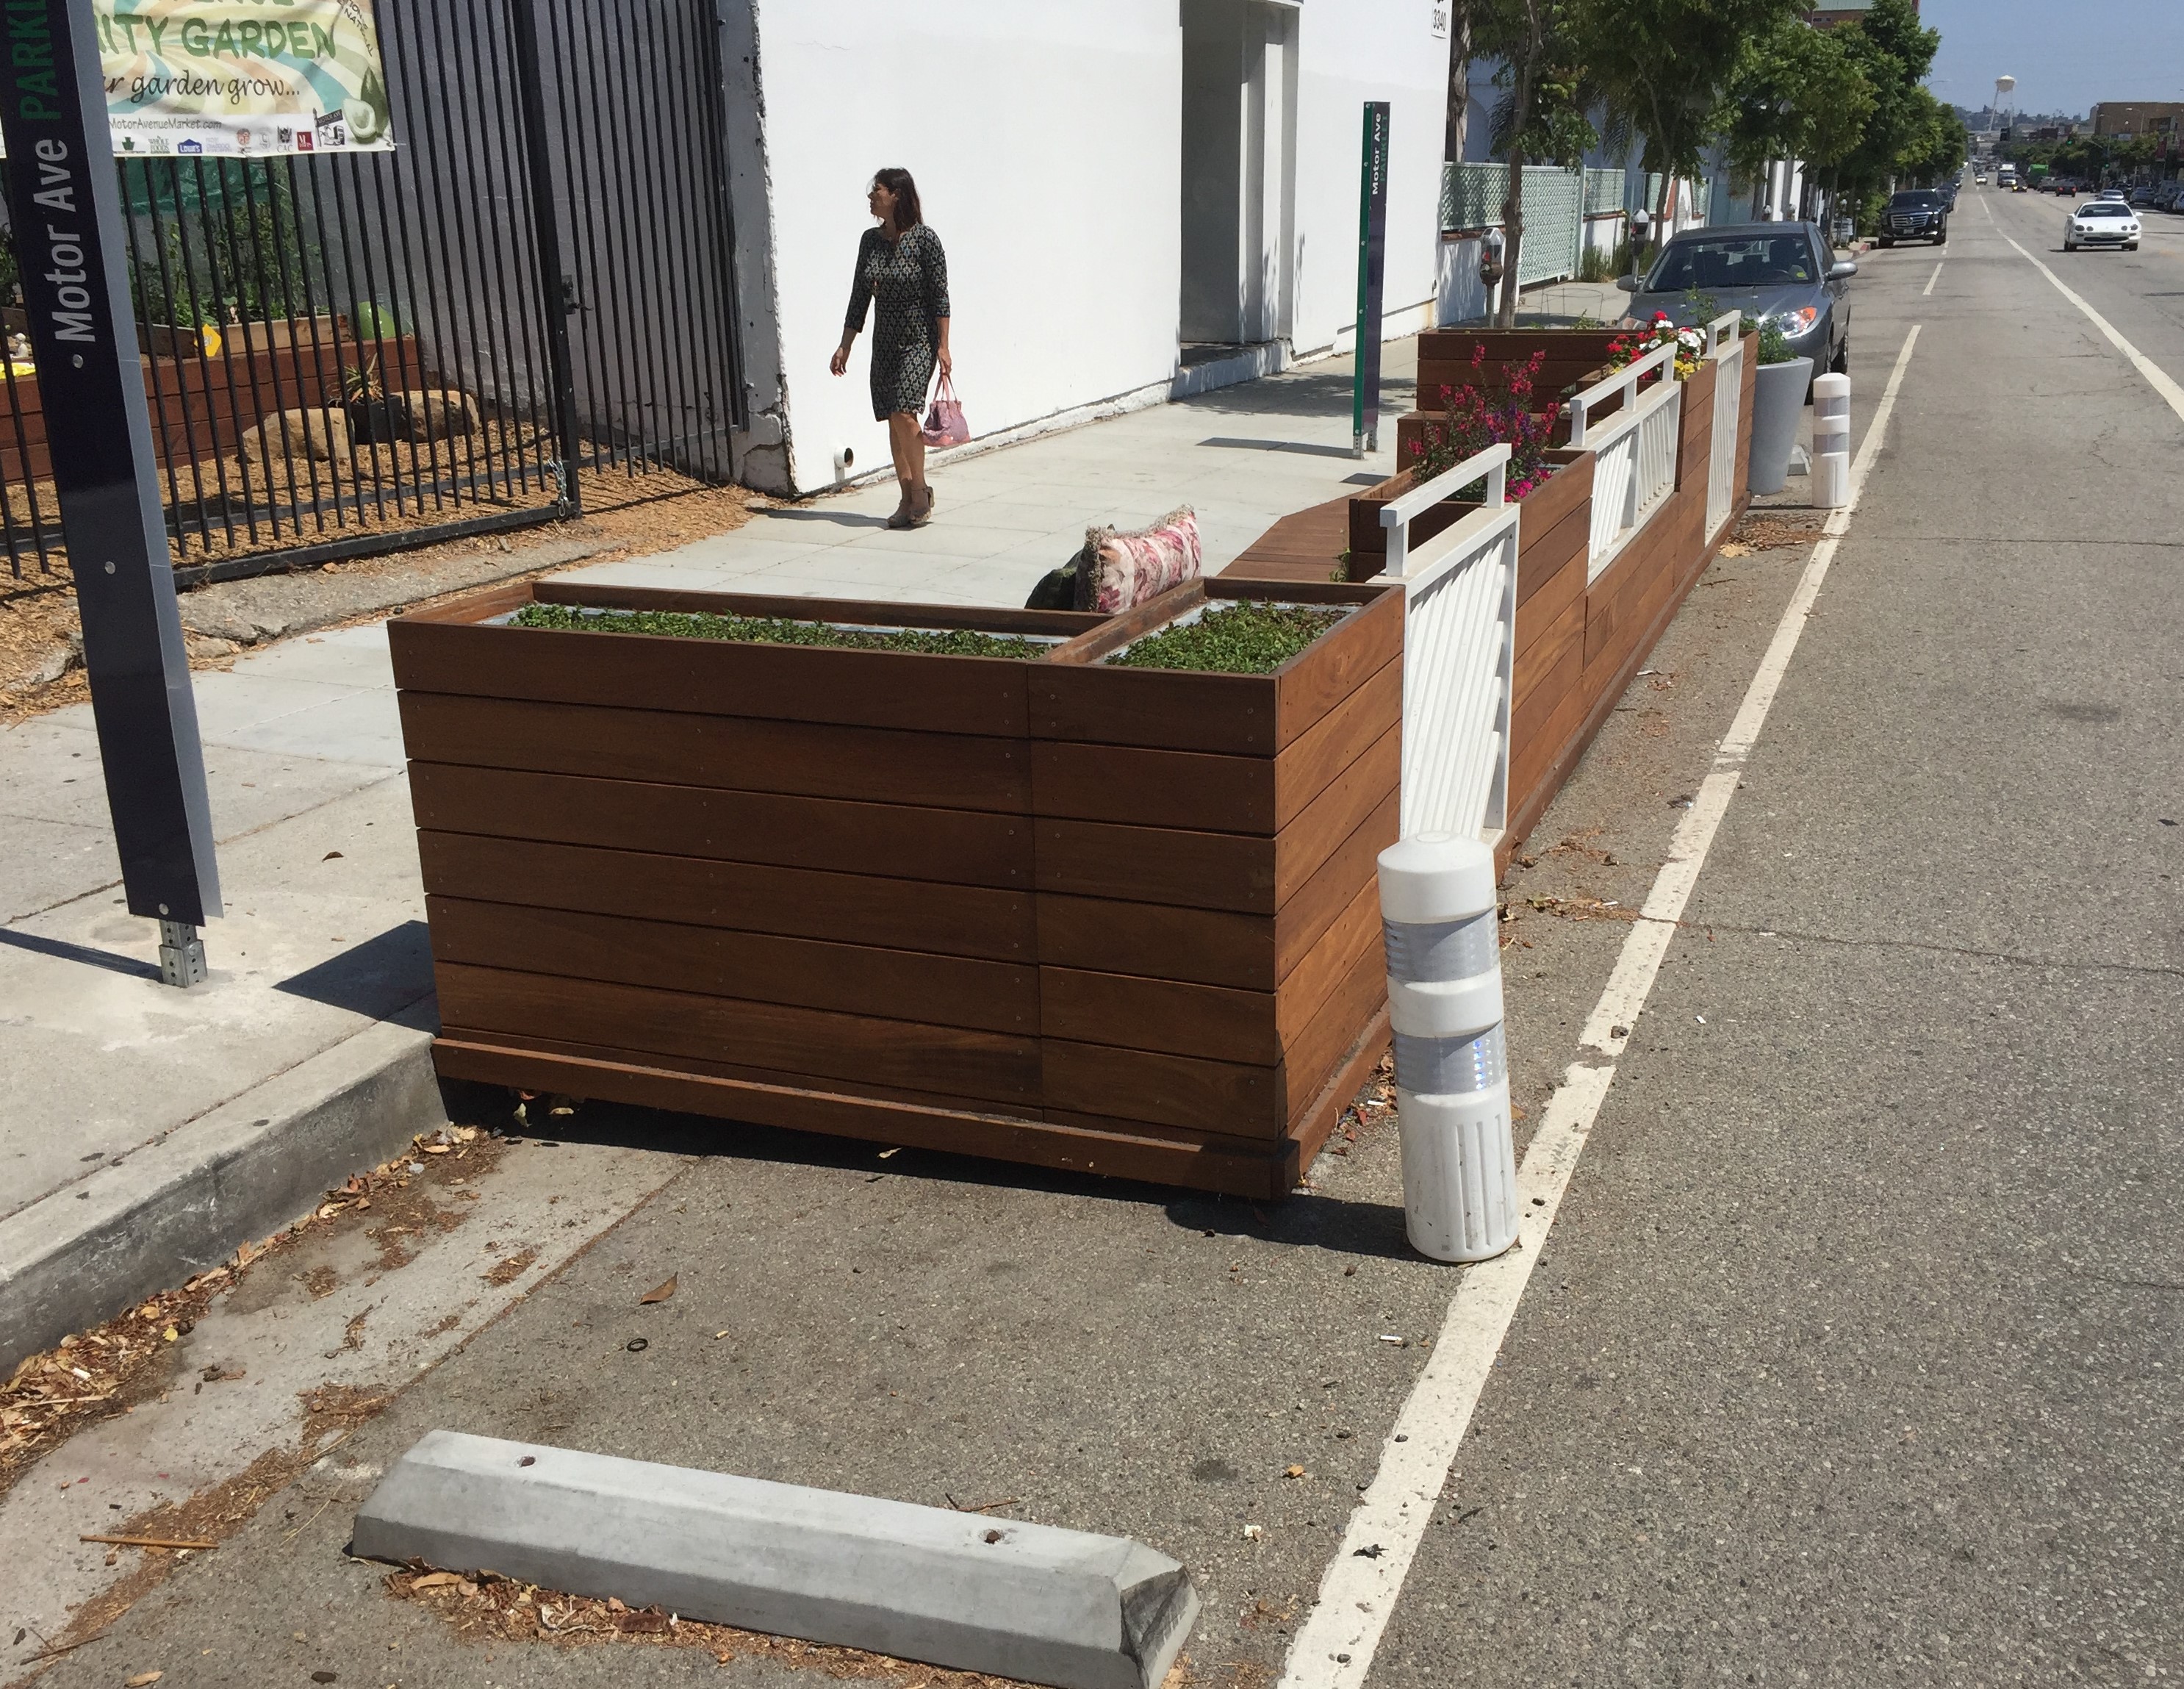 The southern Parklet on Motor, located in front of the Motor Avenue Community Garden